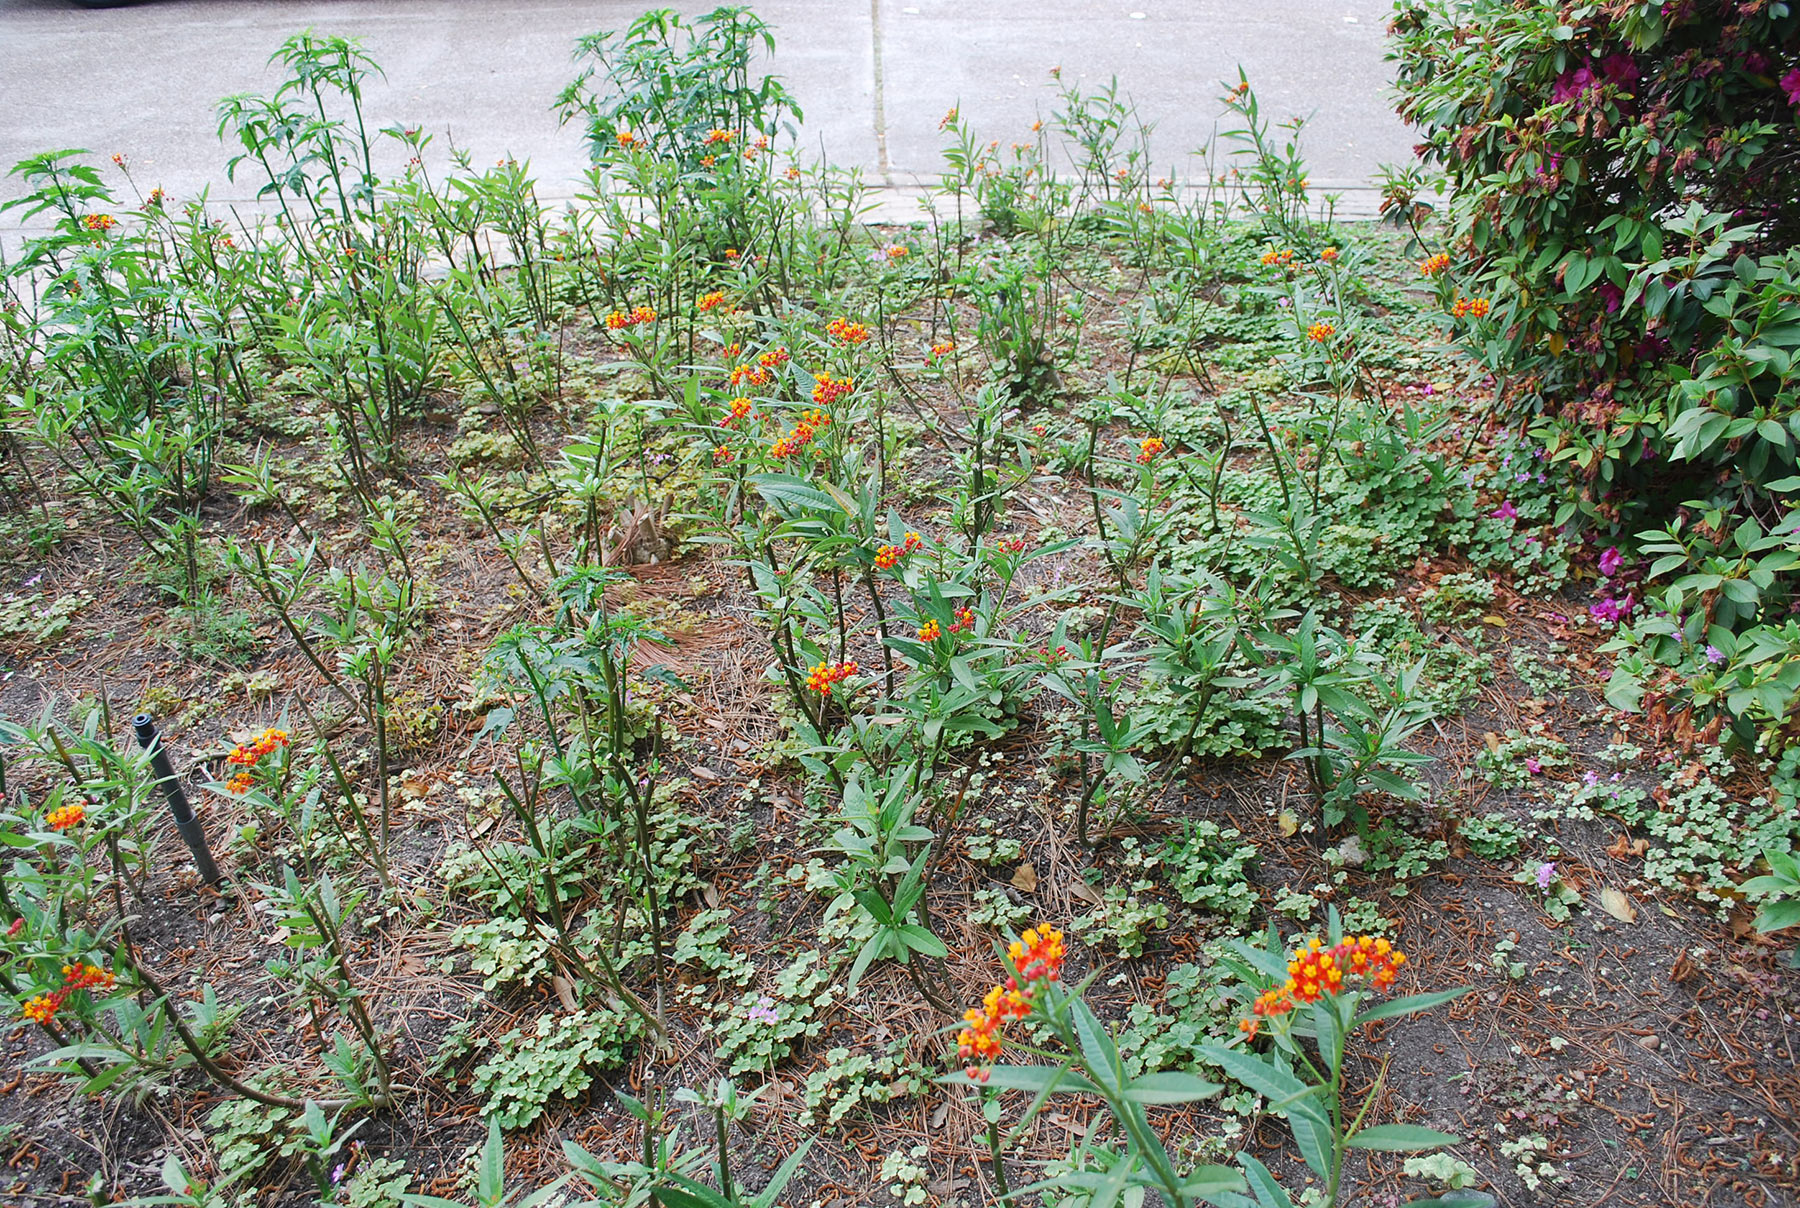 Field site in Houston, TX with tropical milkweed garden; migrant and resident monarchs share habitat here